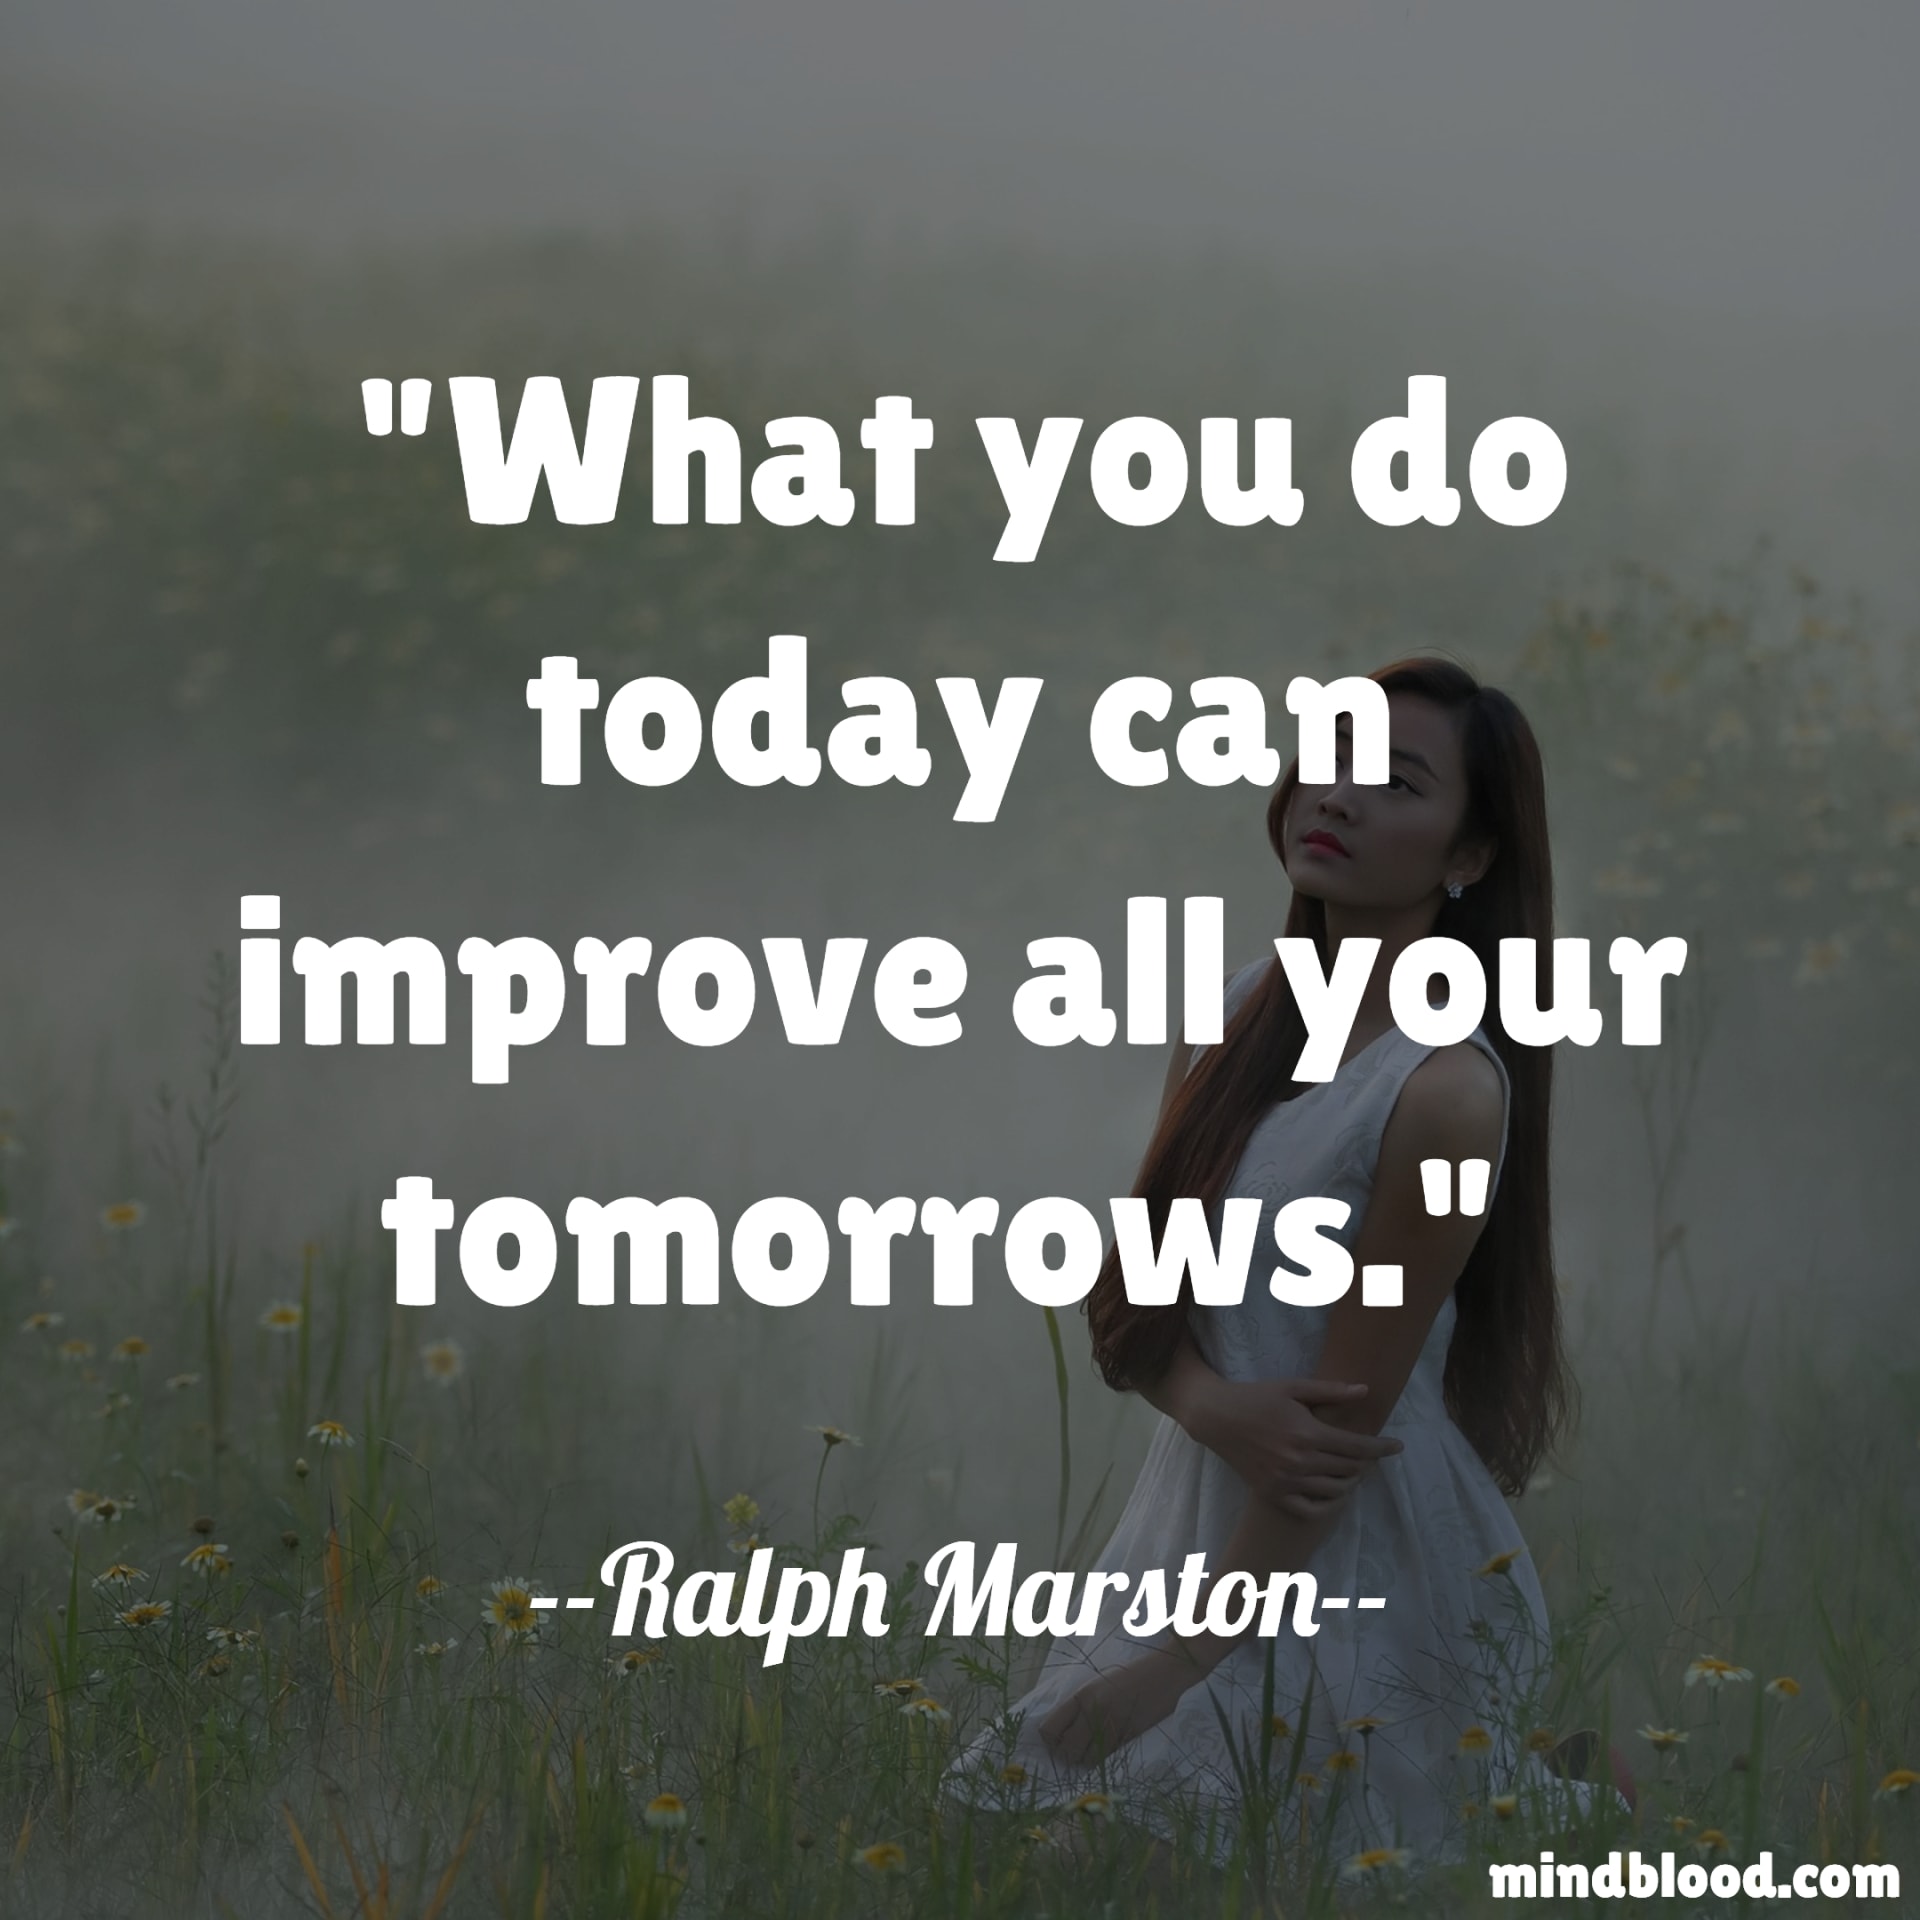 Push Today For What You Want Tomorrow - Lorii Myers. (With Similar Quotes)